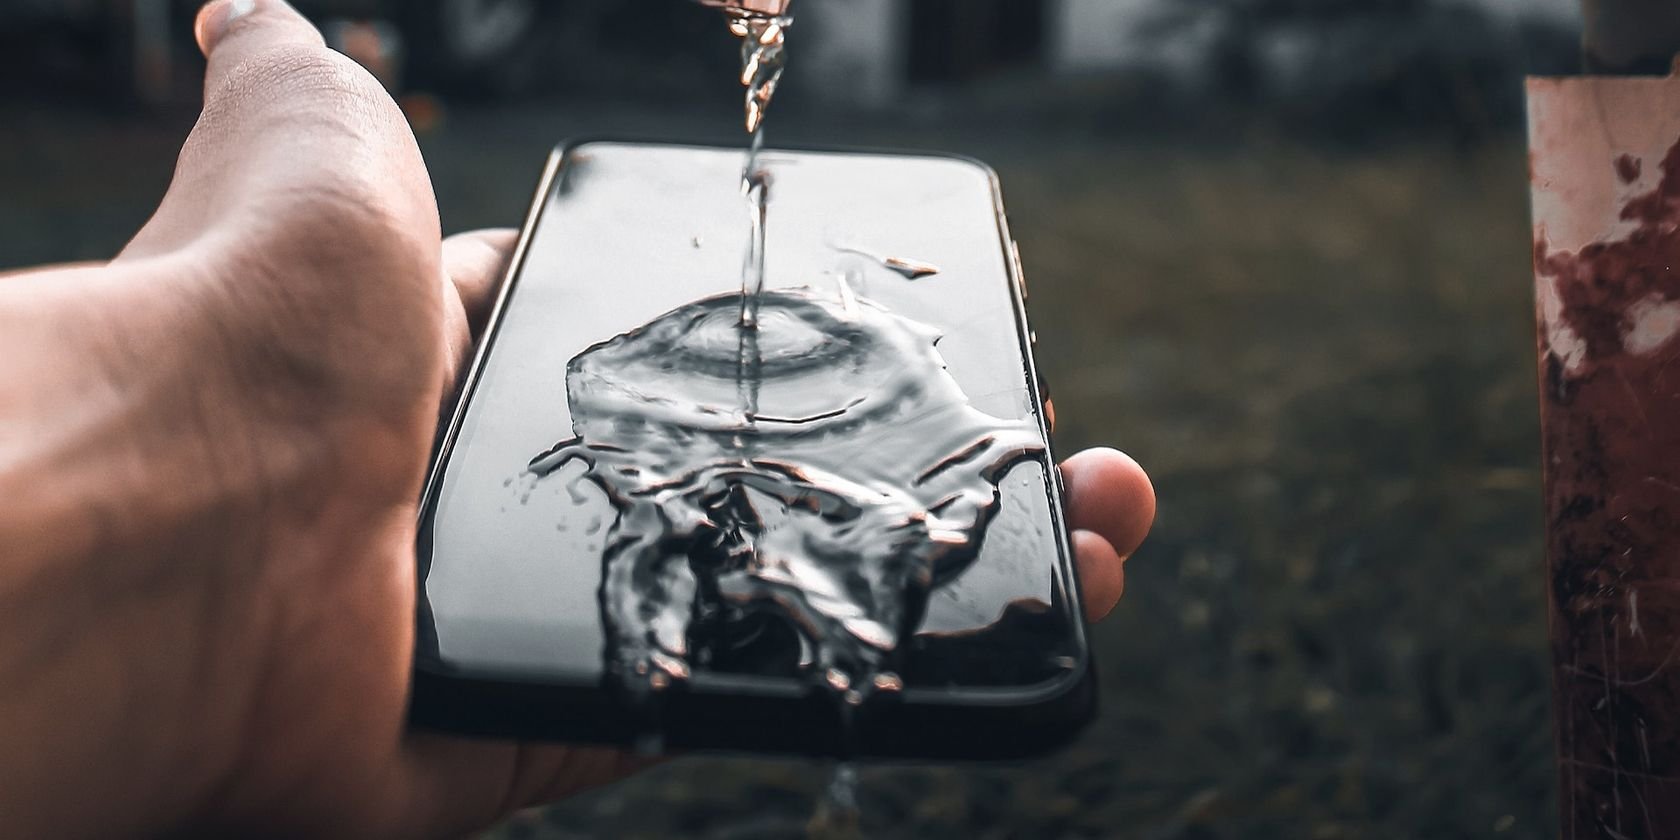 9 Symptoms of a Water-Damaged iPhone